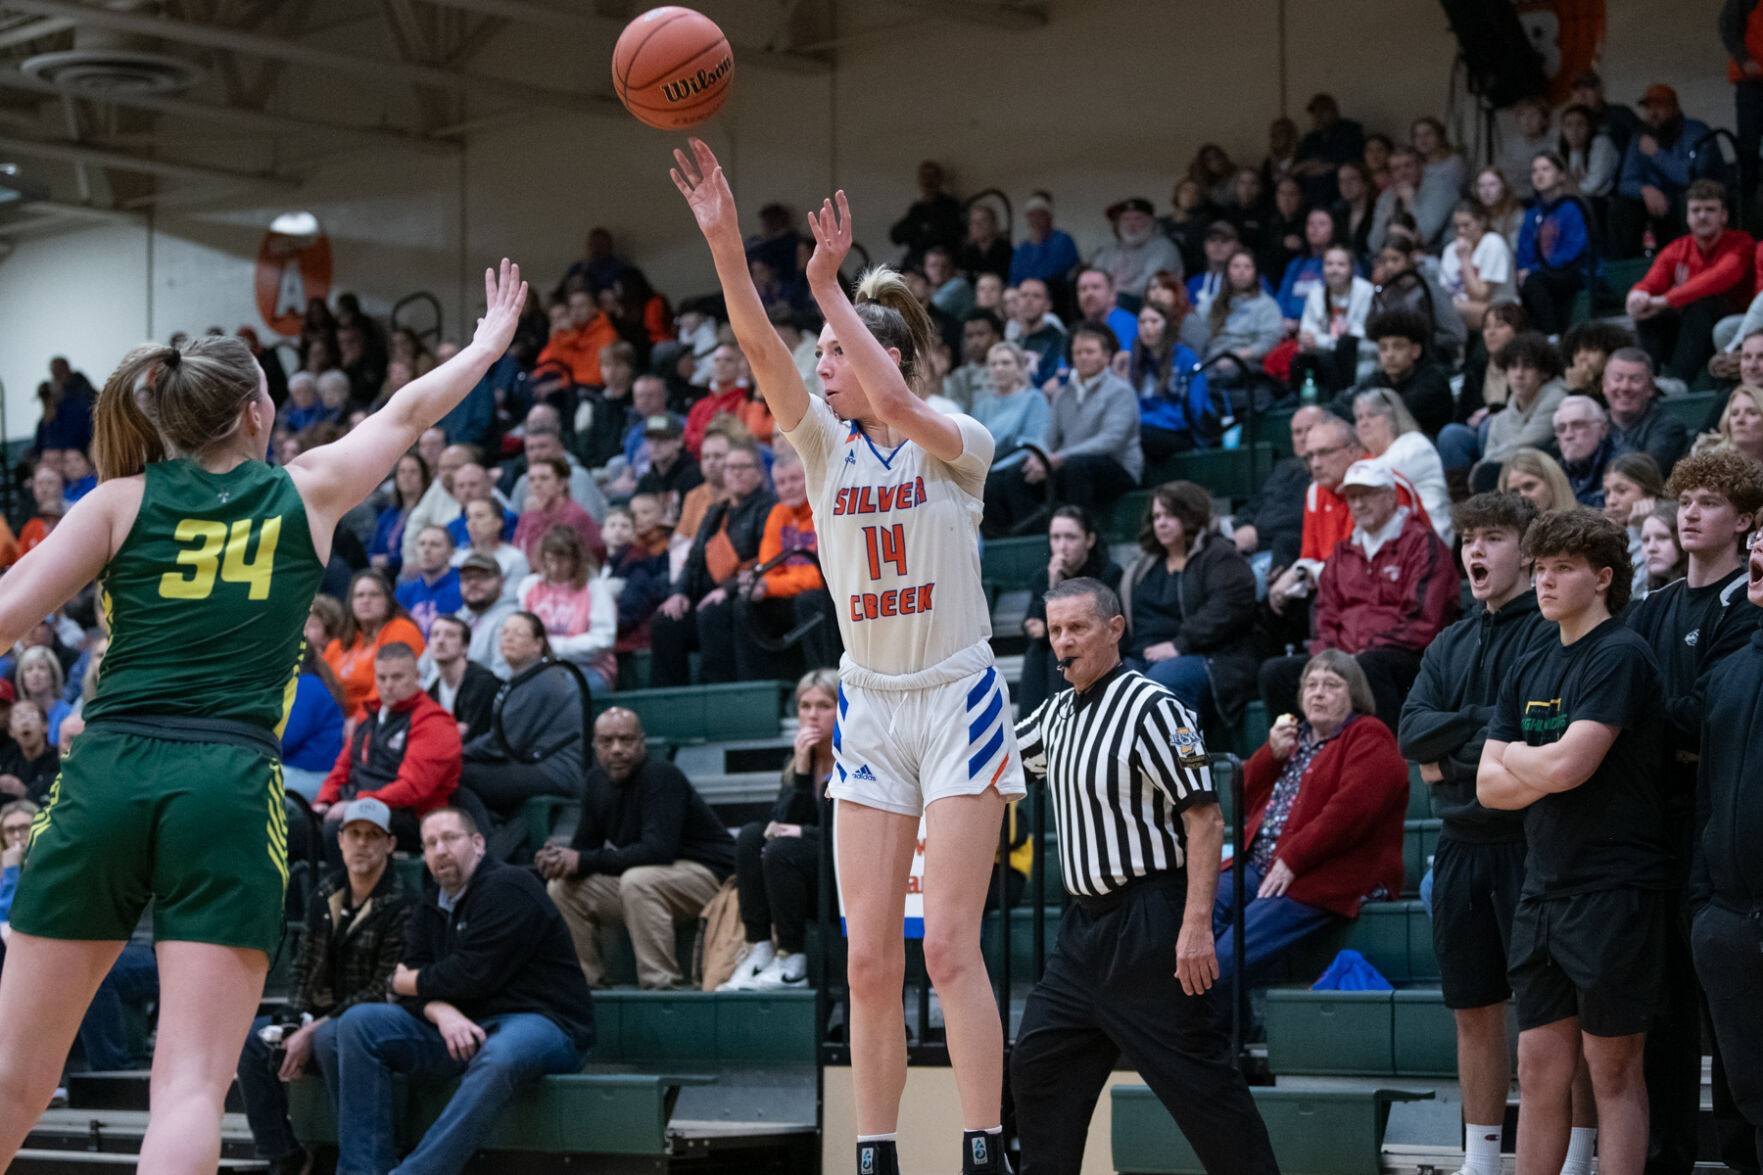 Chloe Spreen Named Indiana Miss Basketball & Top Vote-Getter, Renn and Crosier Recognized